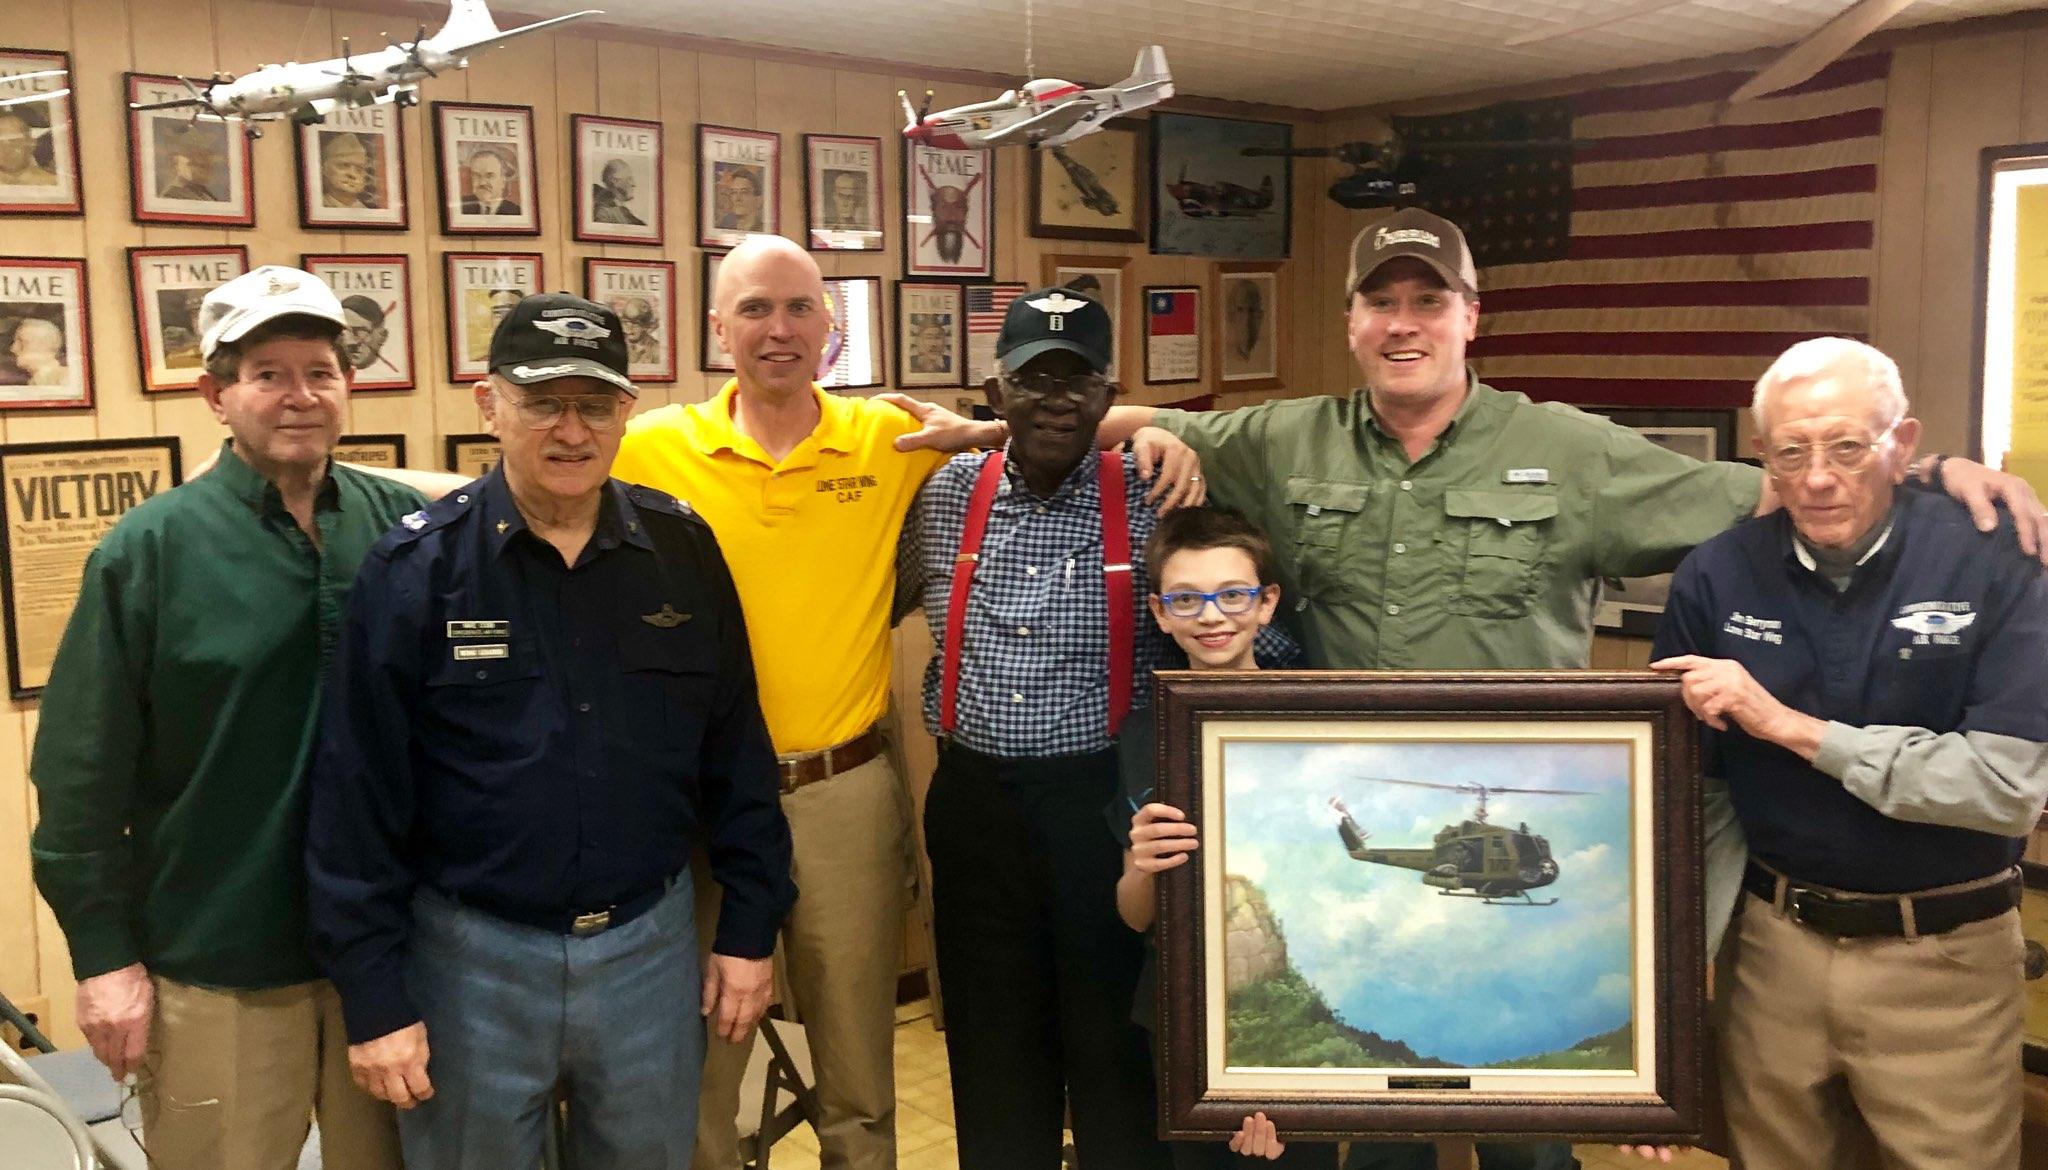 Photo of some of the members of the Lone Star Wing of the Commemorative Air Force.  Left to Right: Doyle Curry, Mike Cobb, Jimmy Page, Bob Snead, Wilson Page, Travis Keeney, and Jim Berryman.  Pictured with an original artwork donated by Bob of his UH-1C gunship 136, entitled 